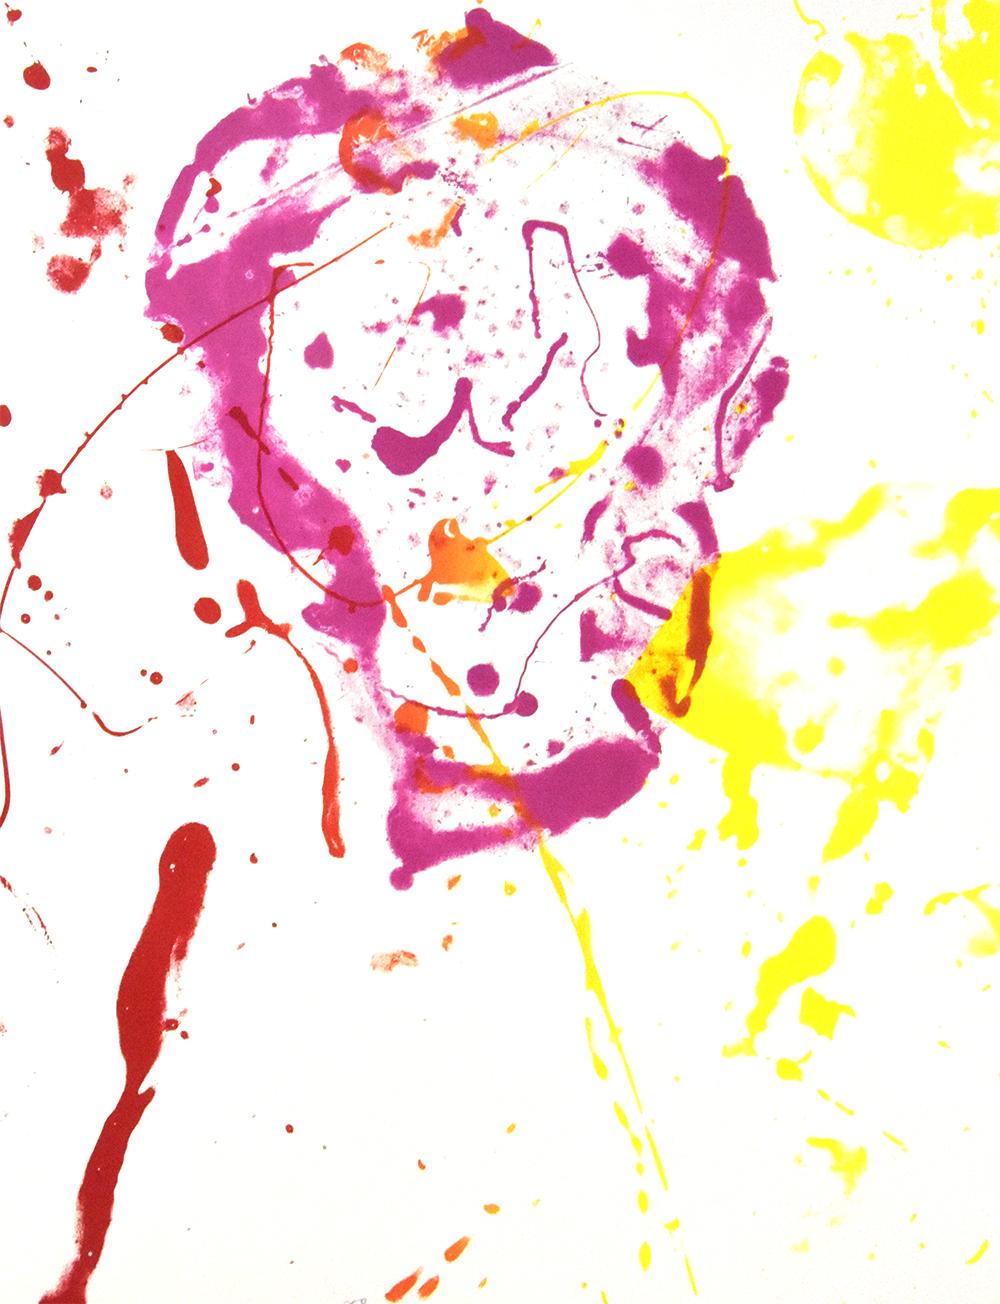 King Corpse, 1986 - Abstract Expressionist Print by Sam Francis